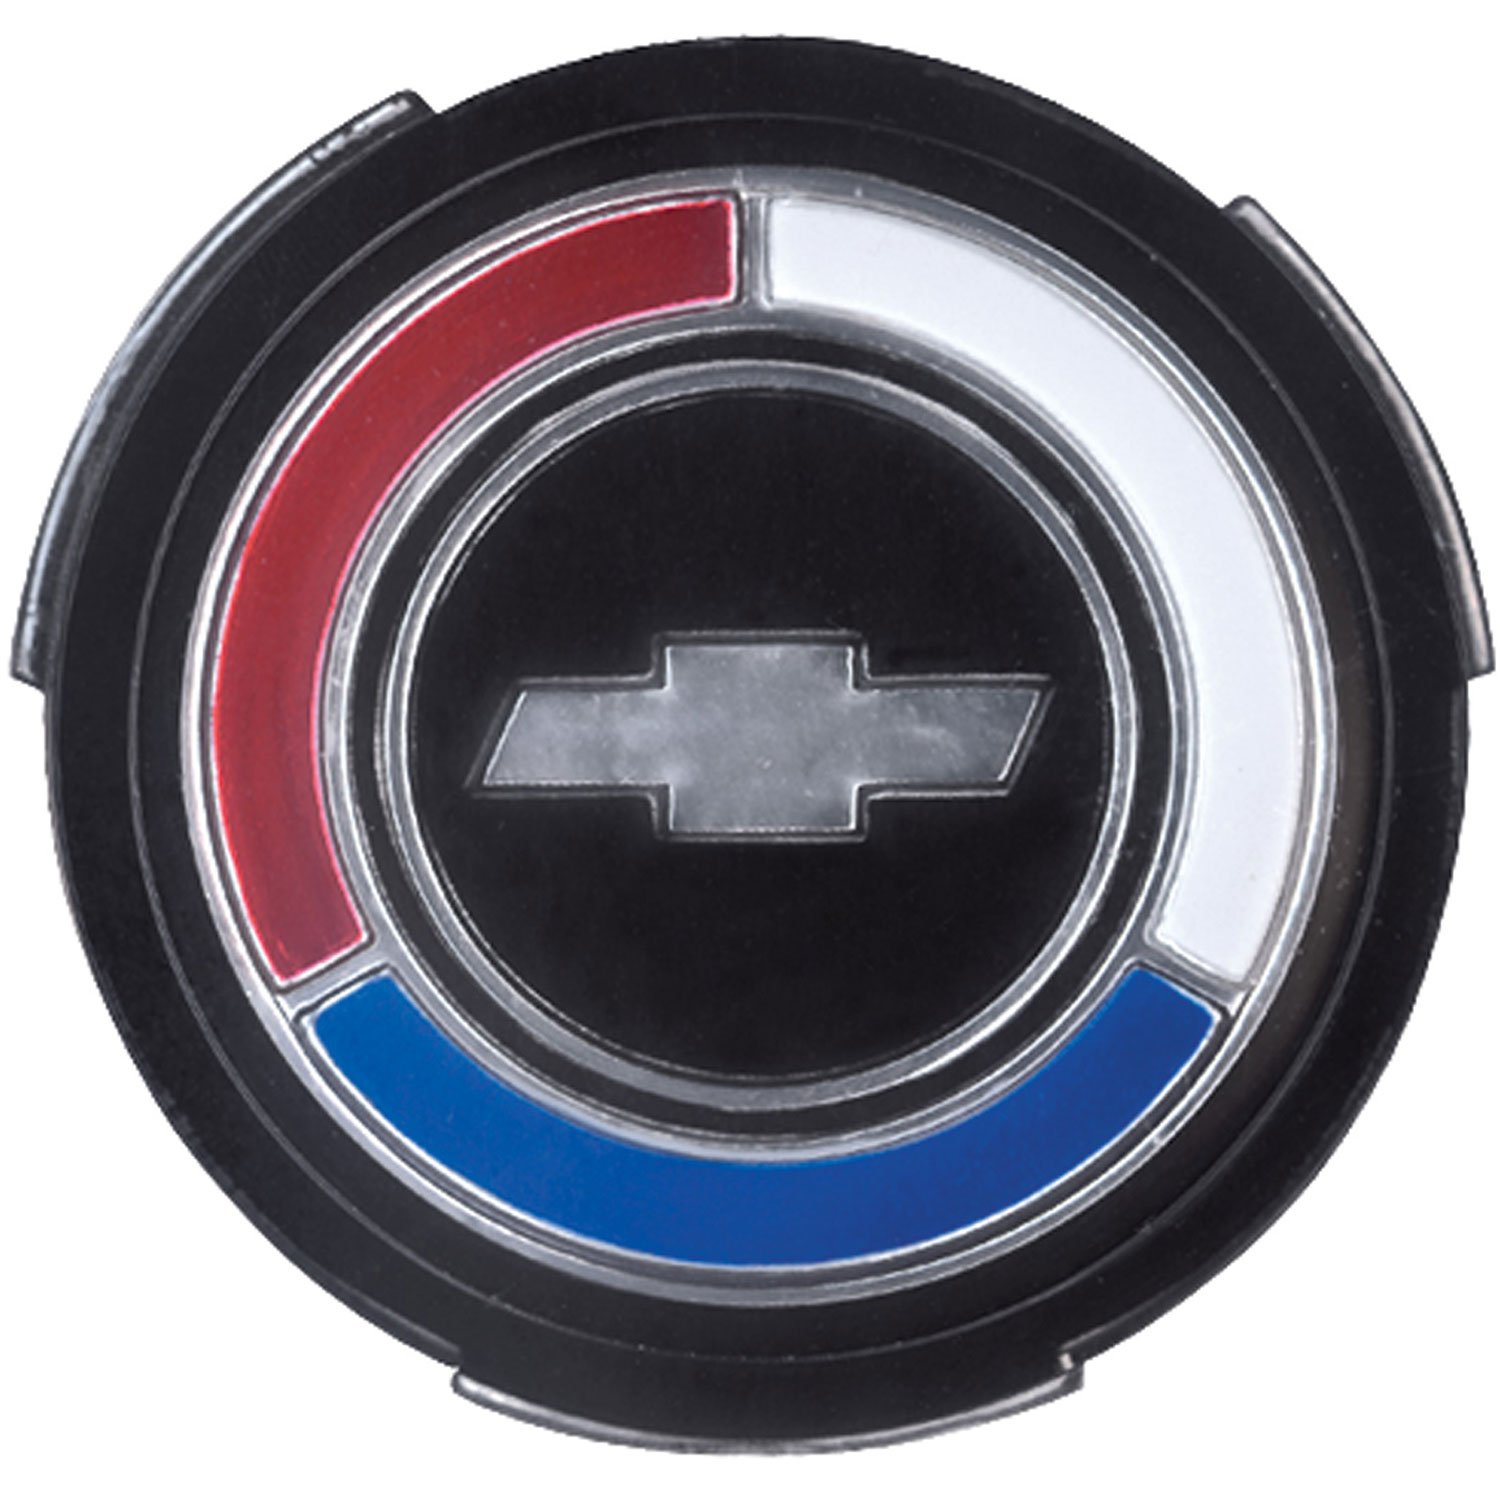 Hubcap Emblem for 1967-1968 Chevy Chevelle with Standard